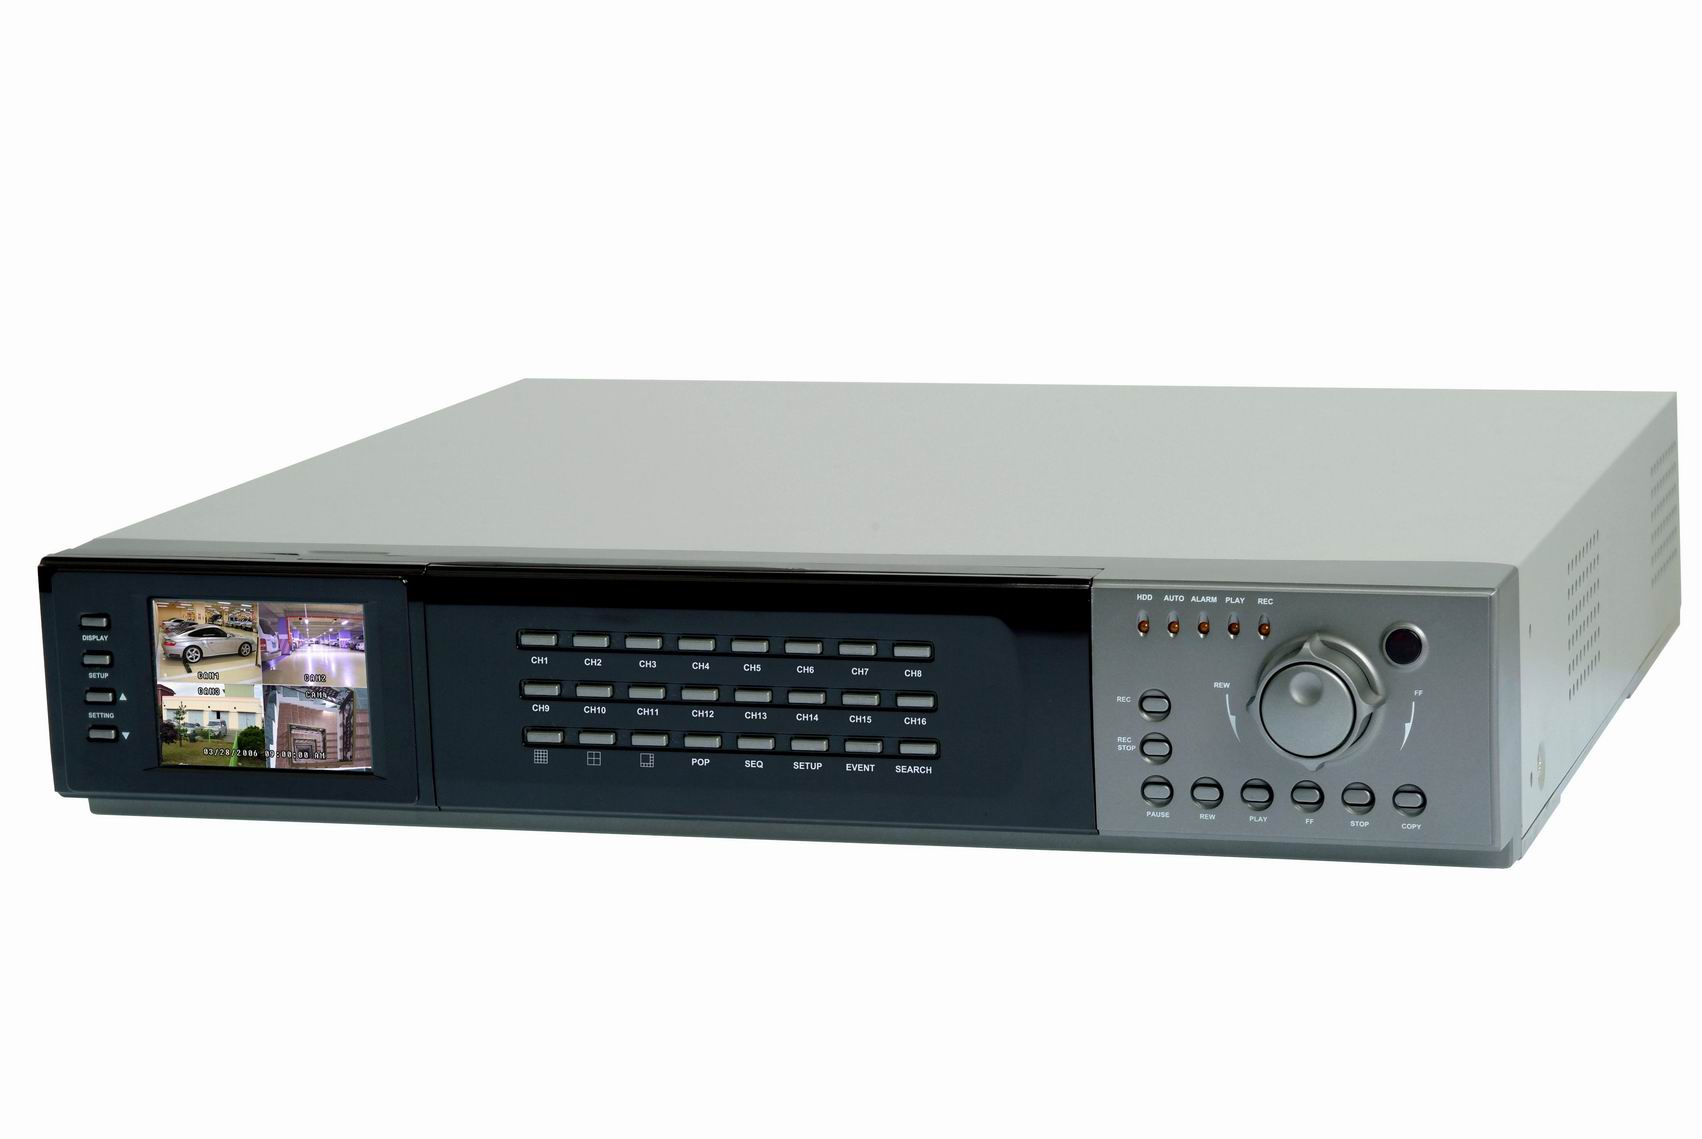  DVR Stand Alone (16ch, Mpeg4) -Bvr516 ( DVR Stand Alone (16ch, Mpeg4) -Bvr516)